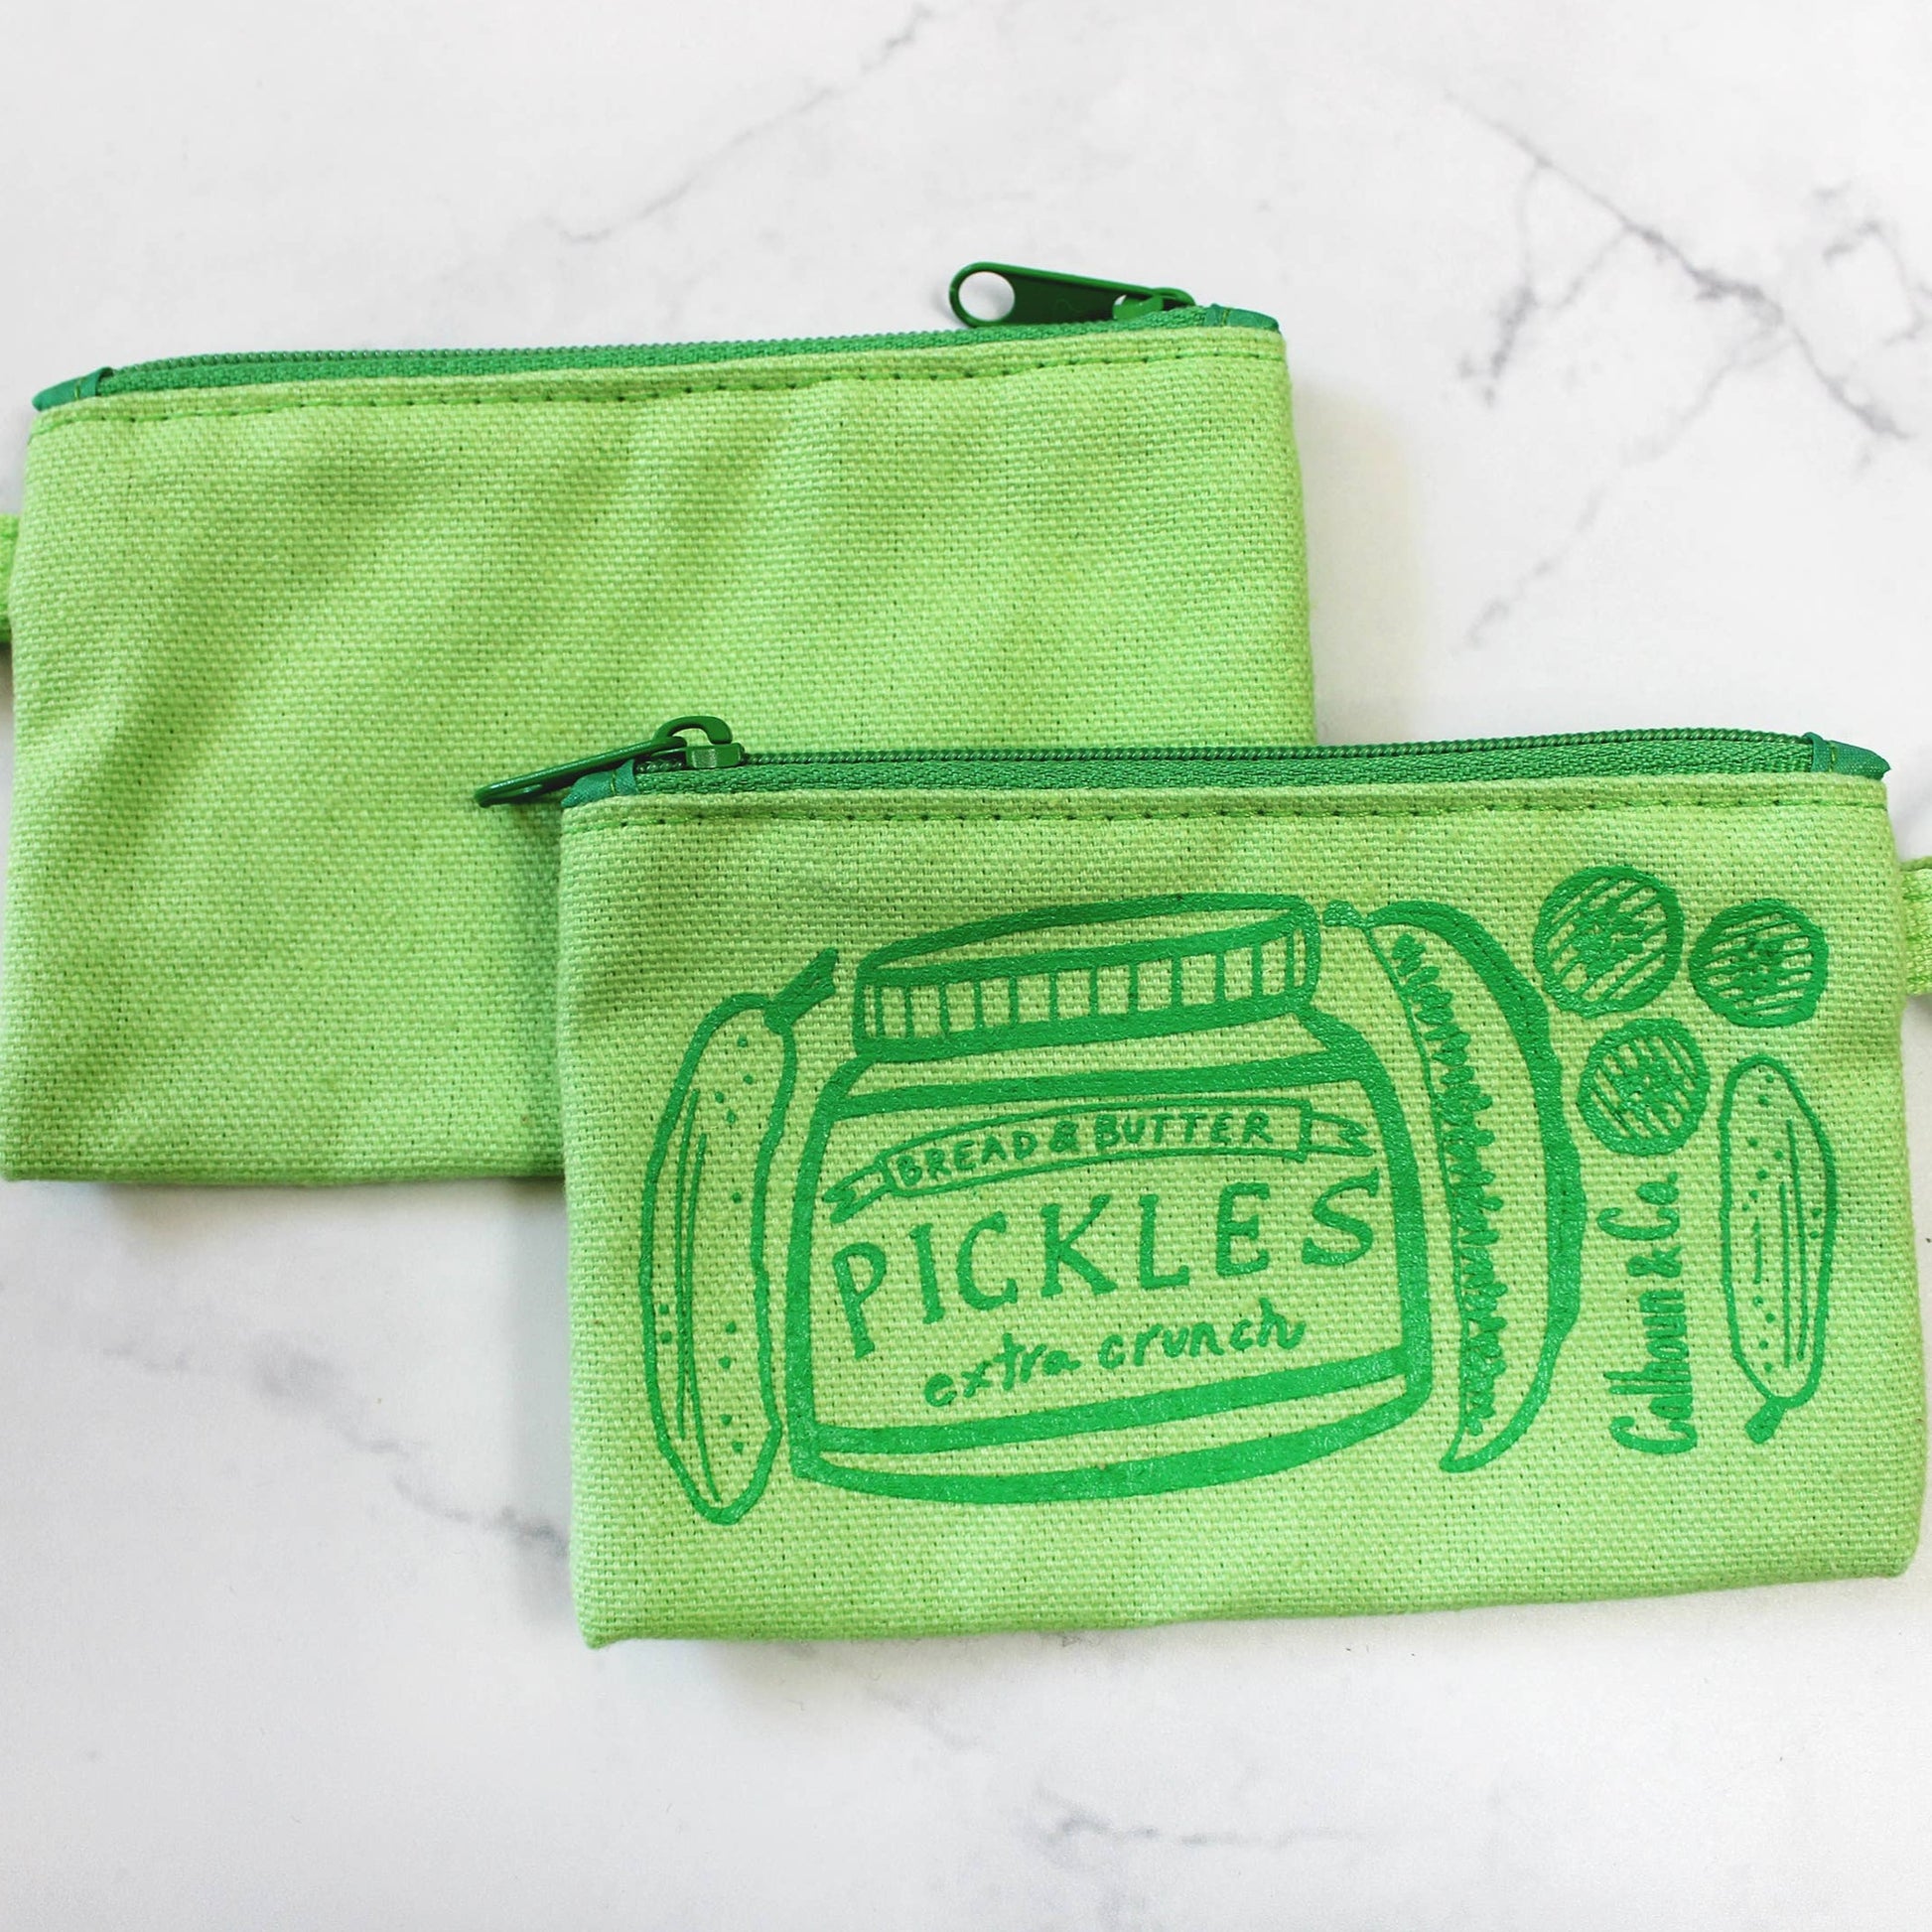 Showcasing back and front of green zippered pickle pouch